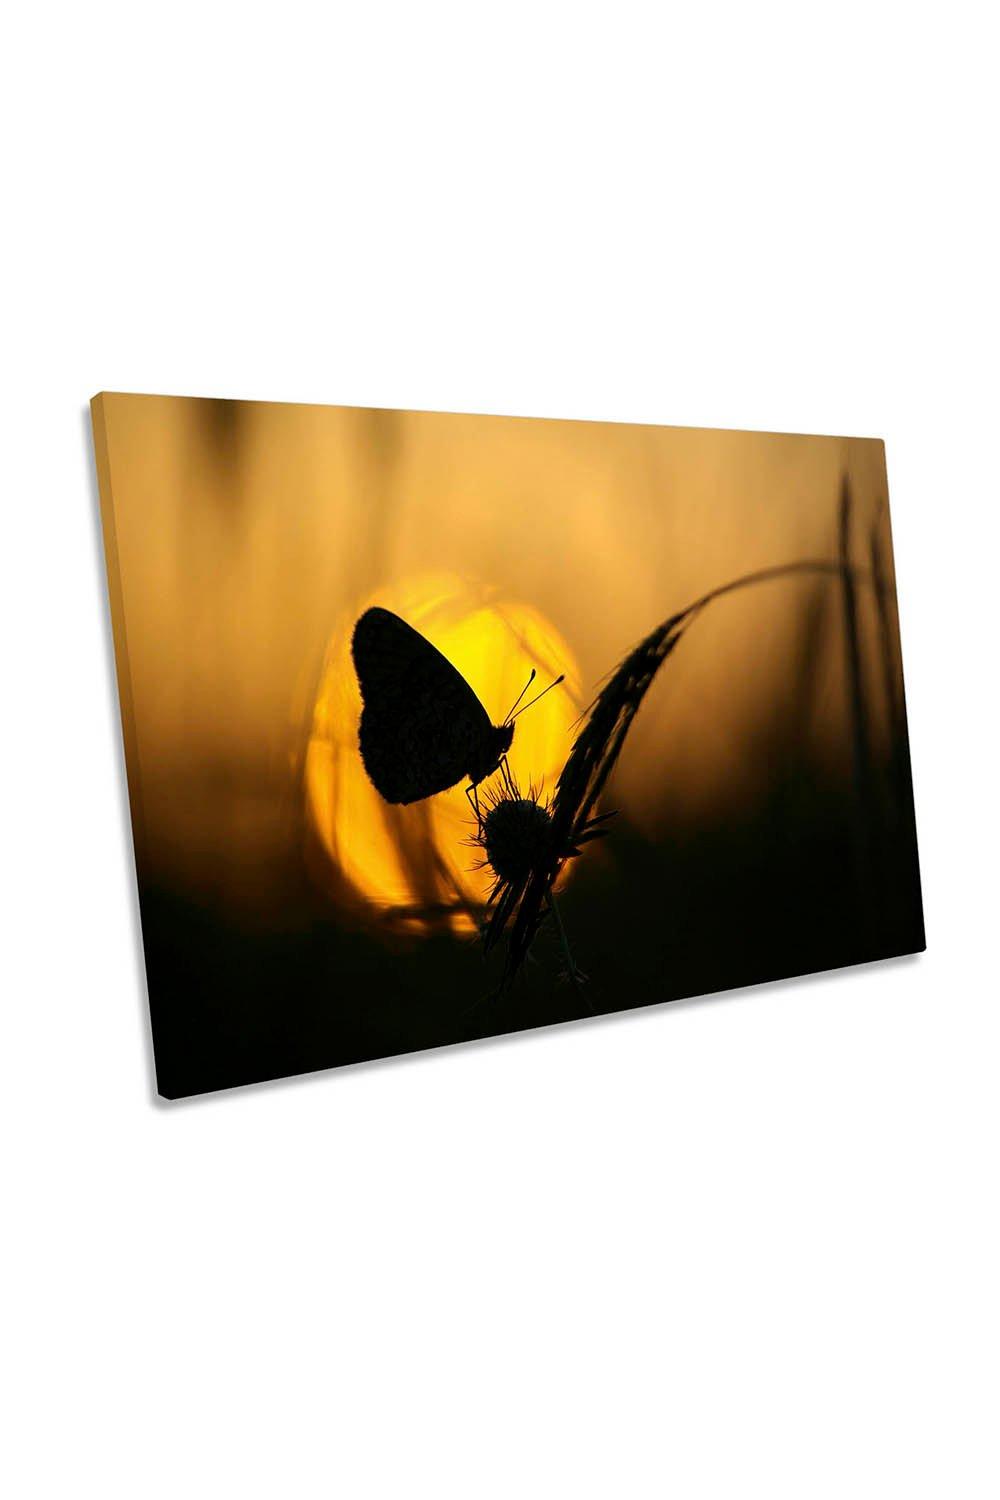 Butterfly Sunset Floral Orange Canvas Wall Art Picture Print